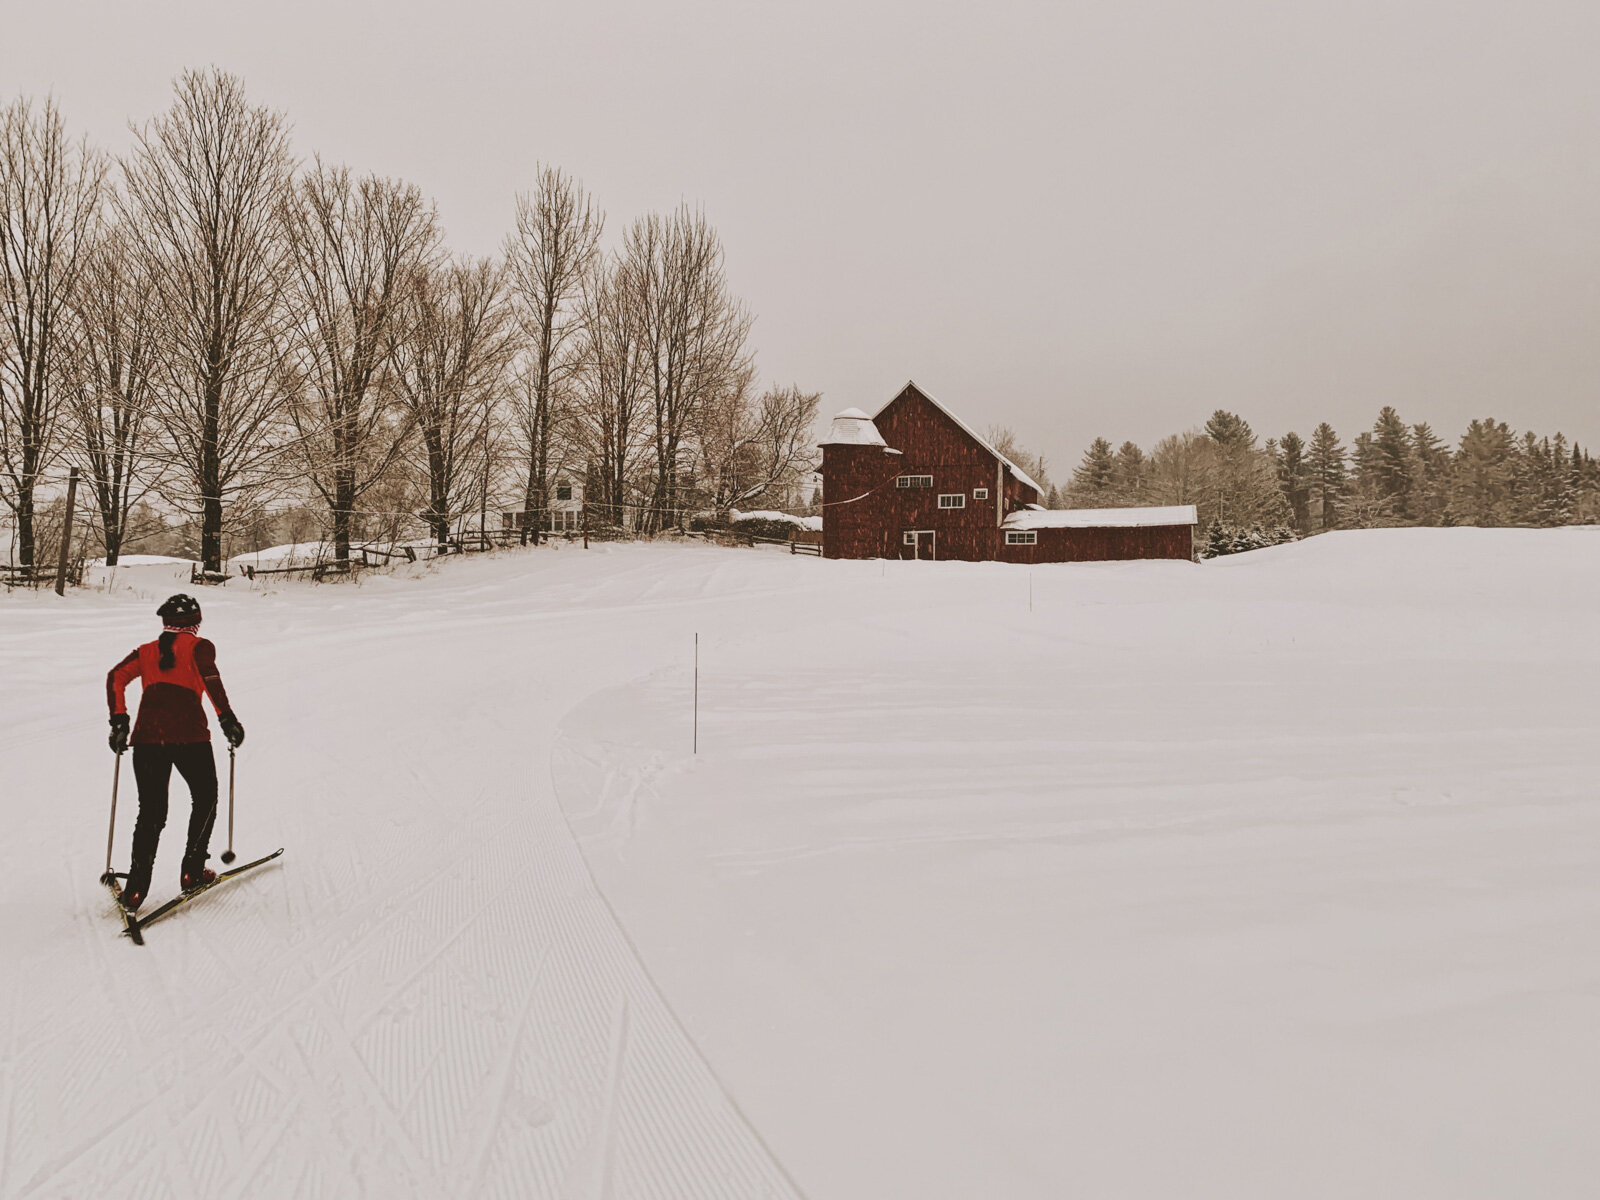 Ski at additional areas, including the Craftsbury Outdoor Center